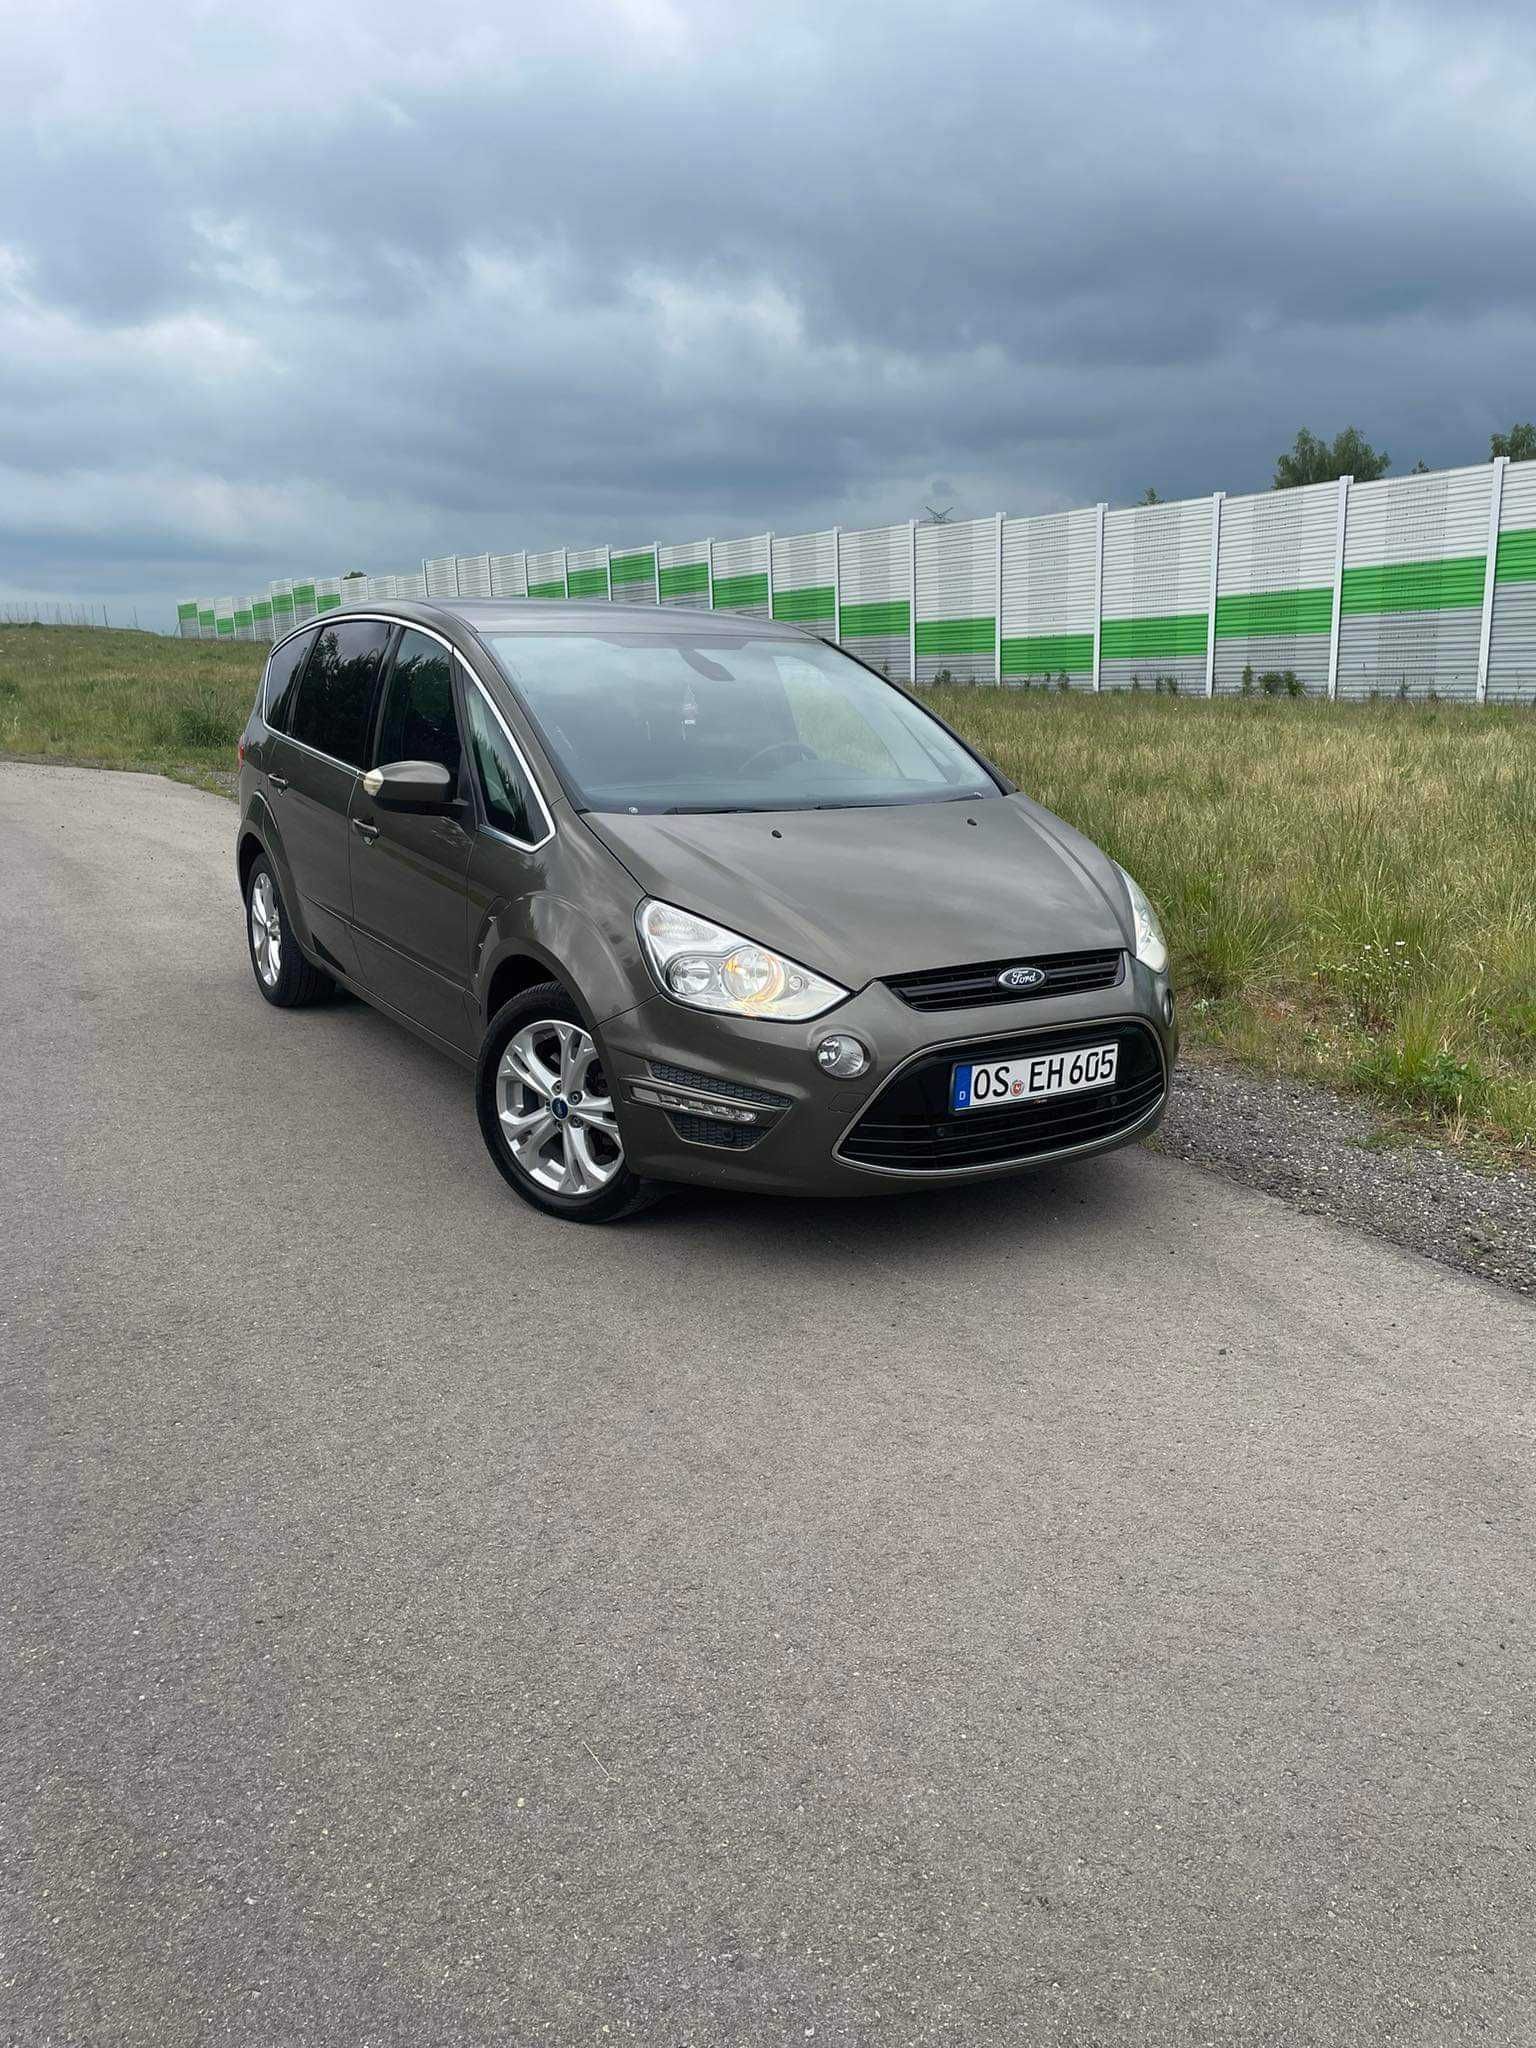 FORD S-MAX 2011R 2.2 Tdci